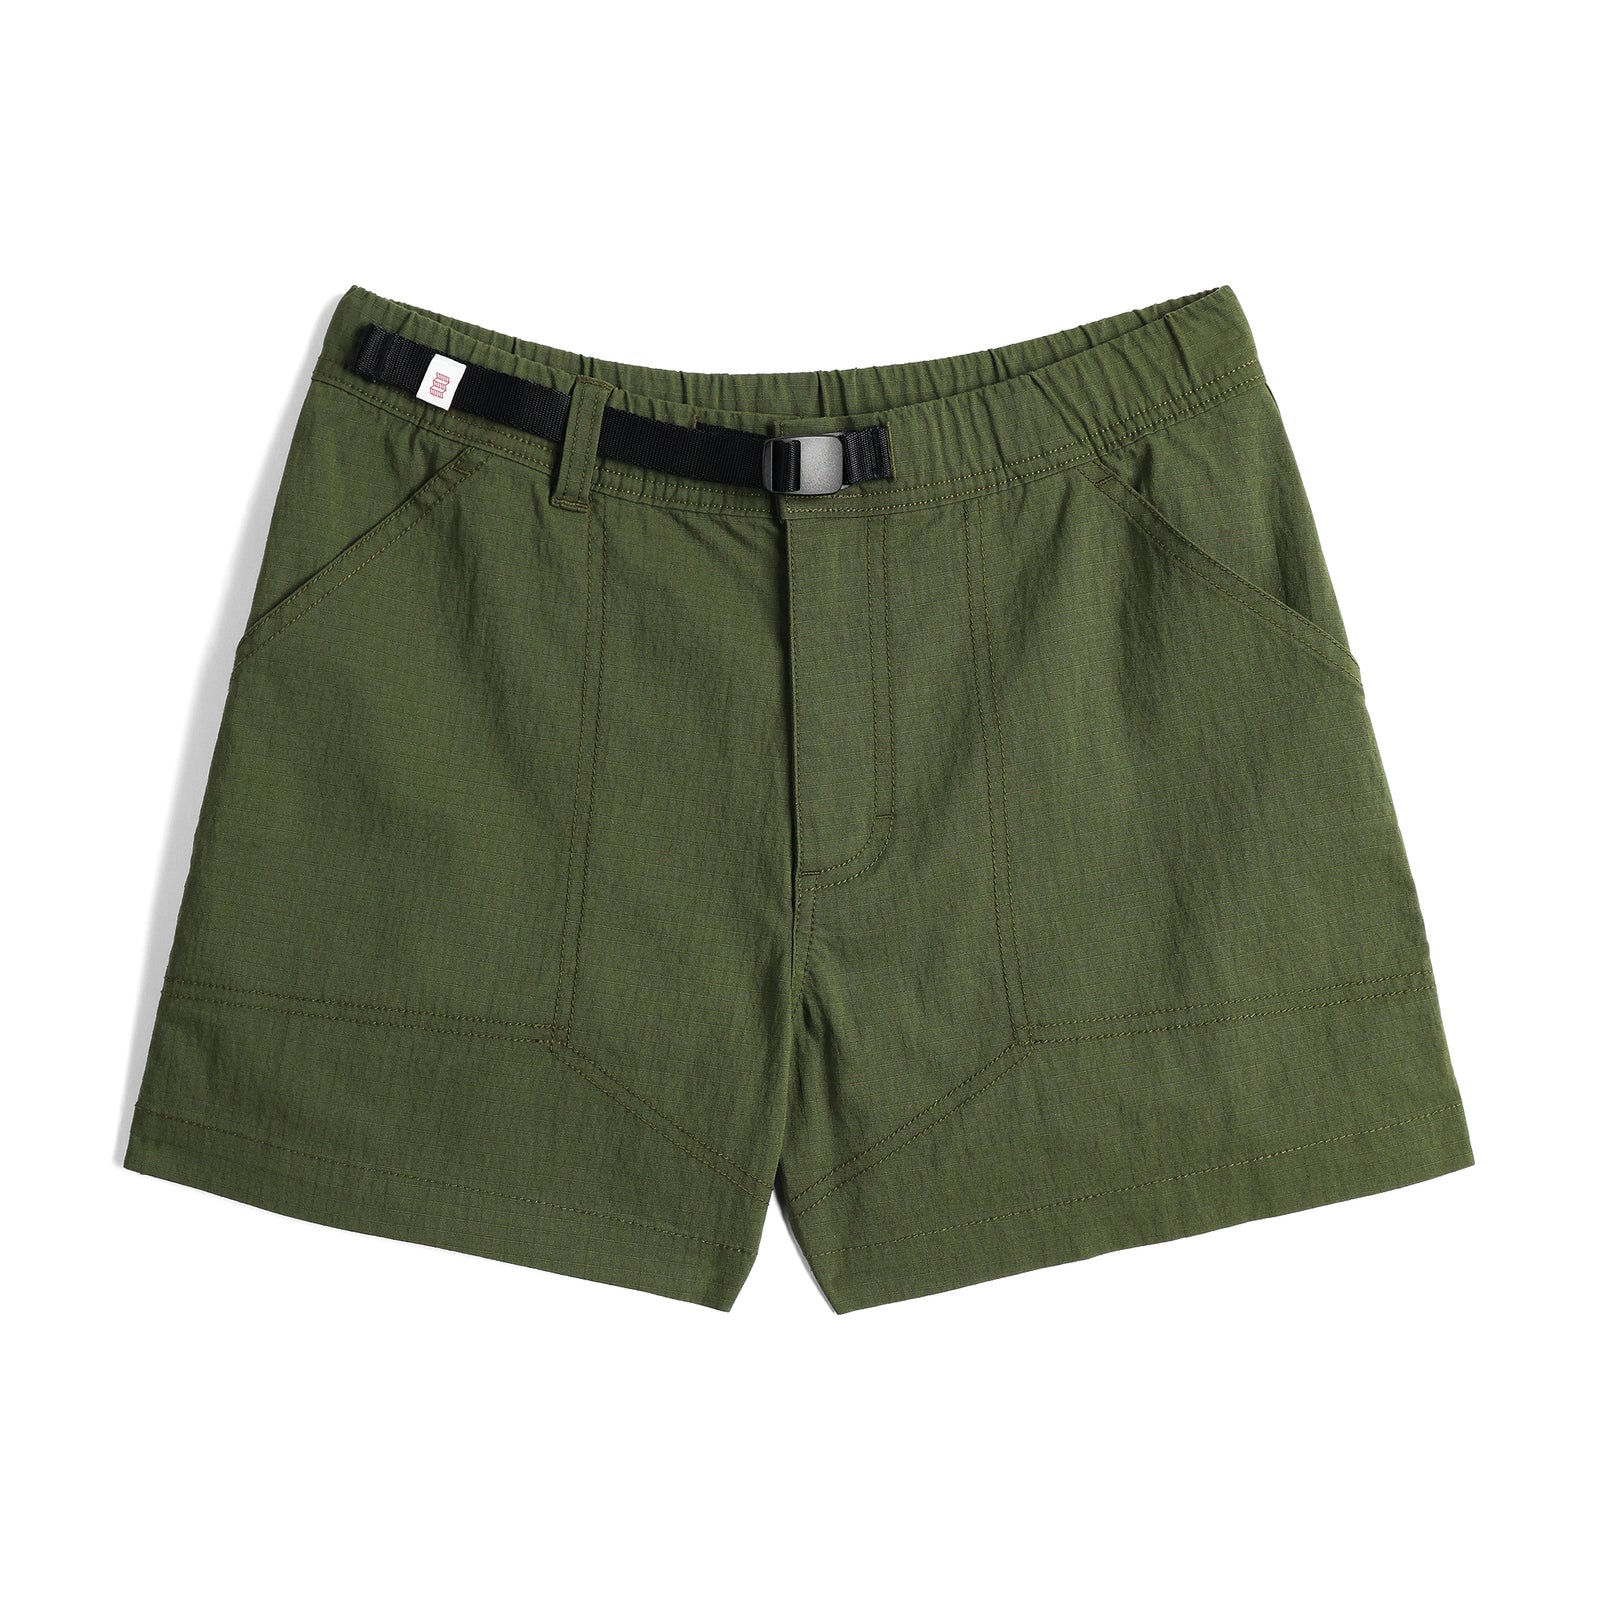 Front View of Topo Designs Mountain Short Ripstop - Women's in "Olive"